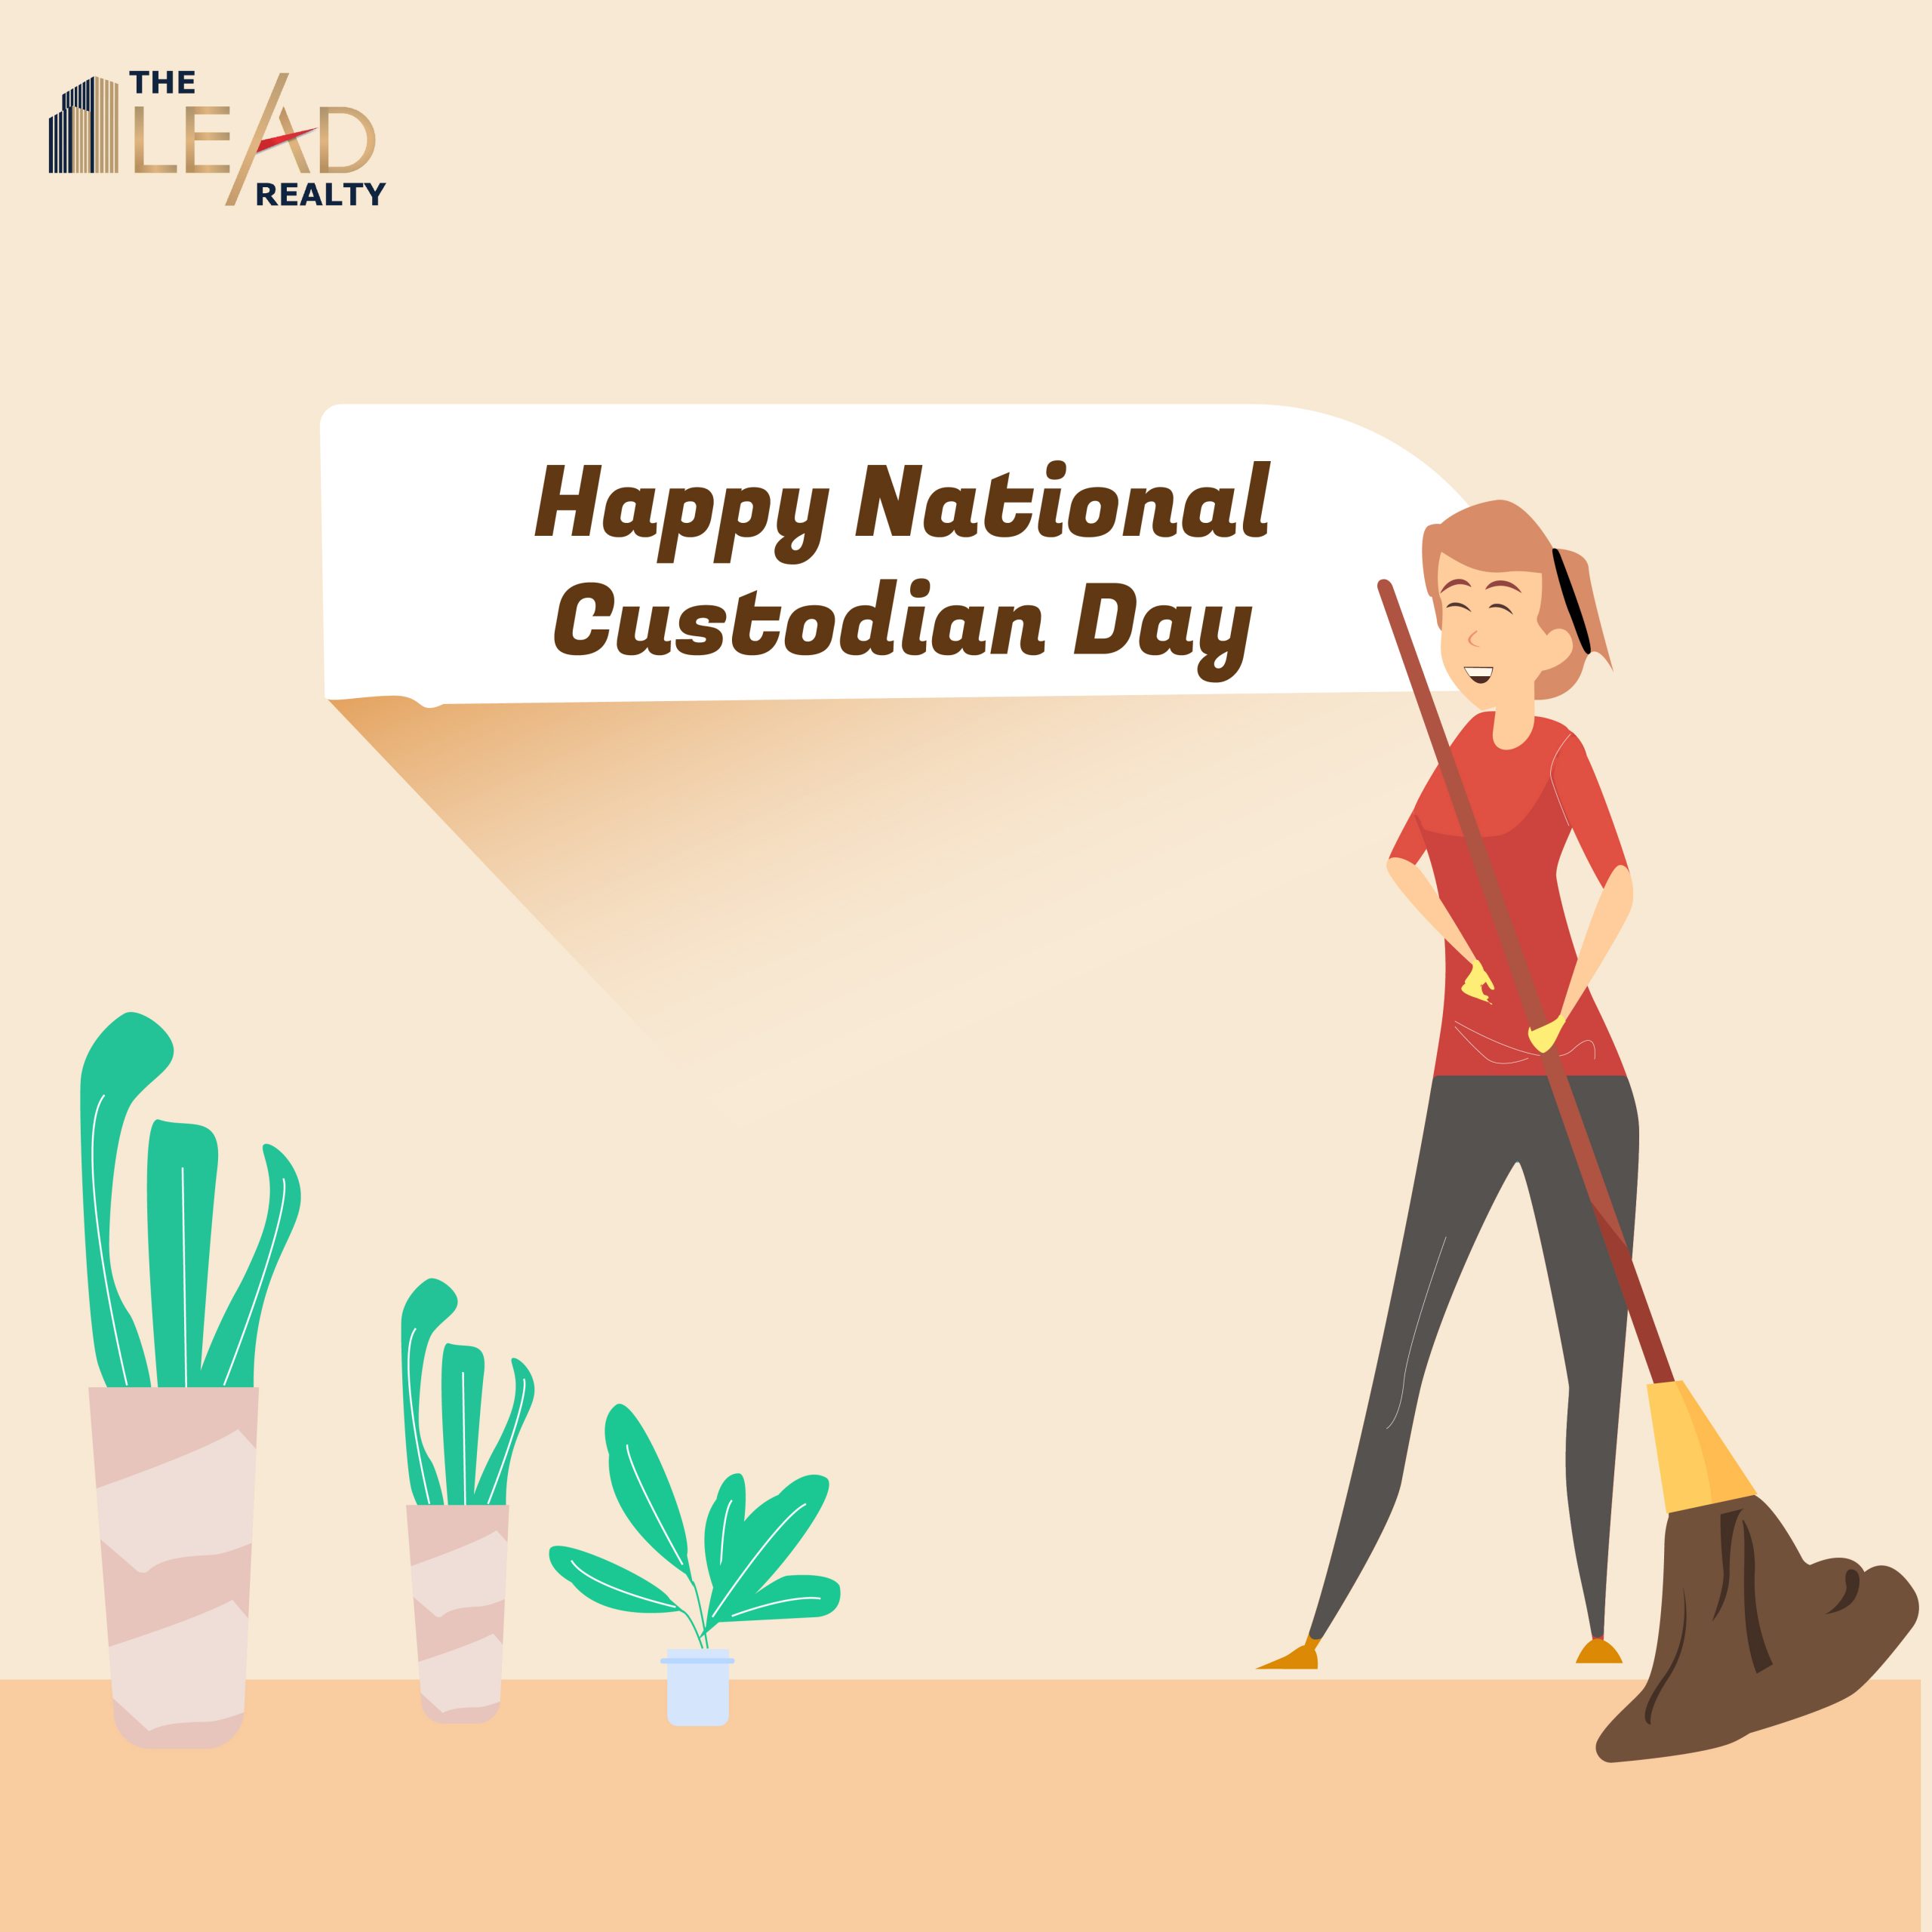 The Lead Realty Happy National Custodian Day